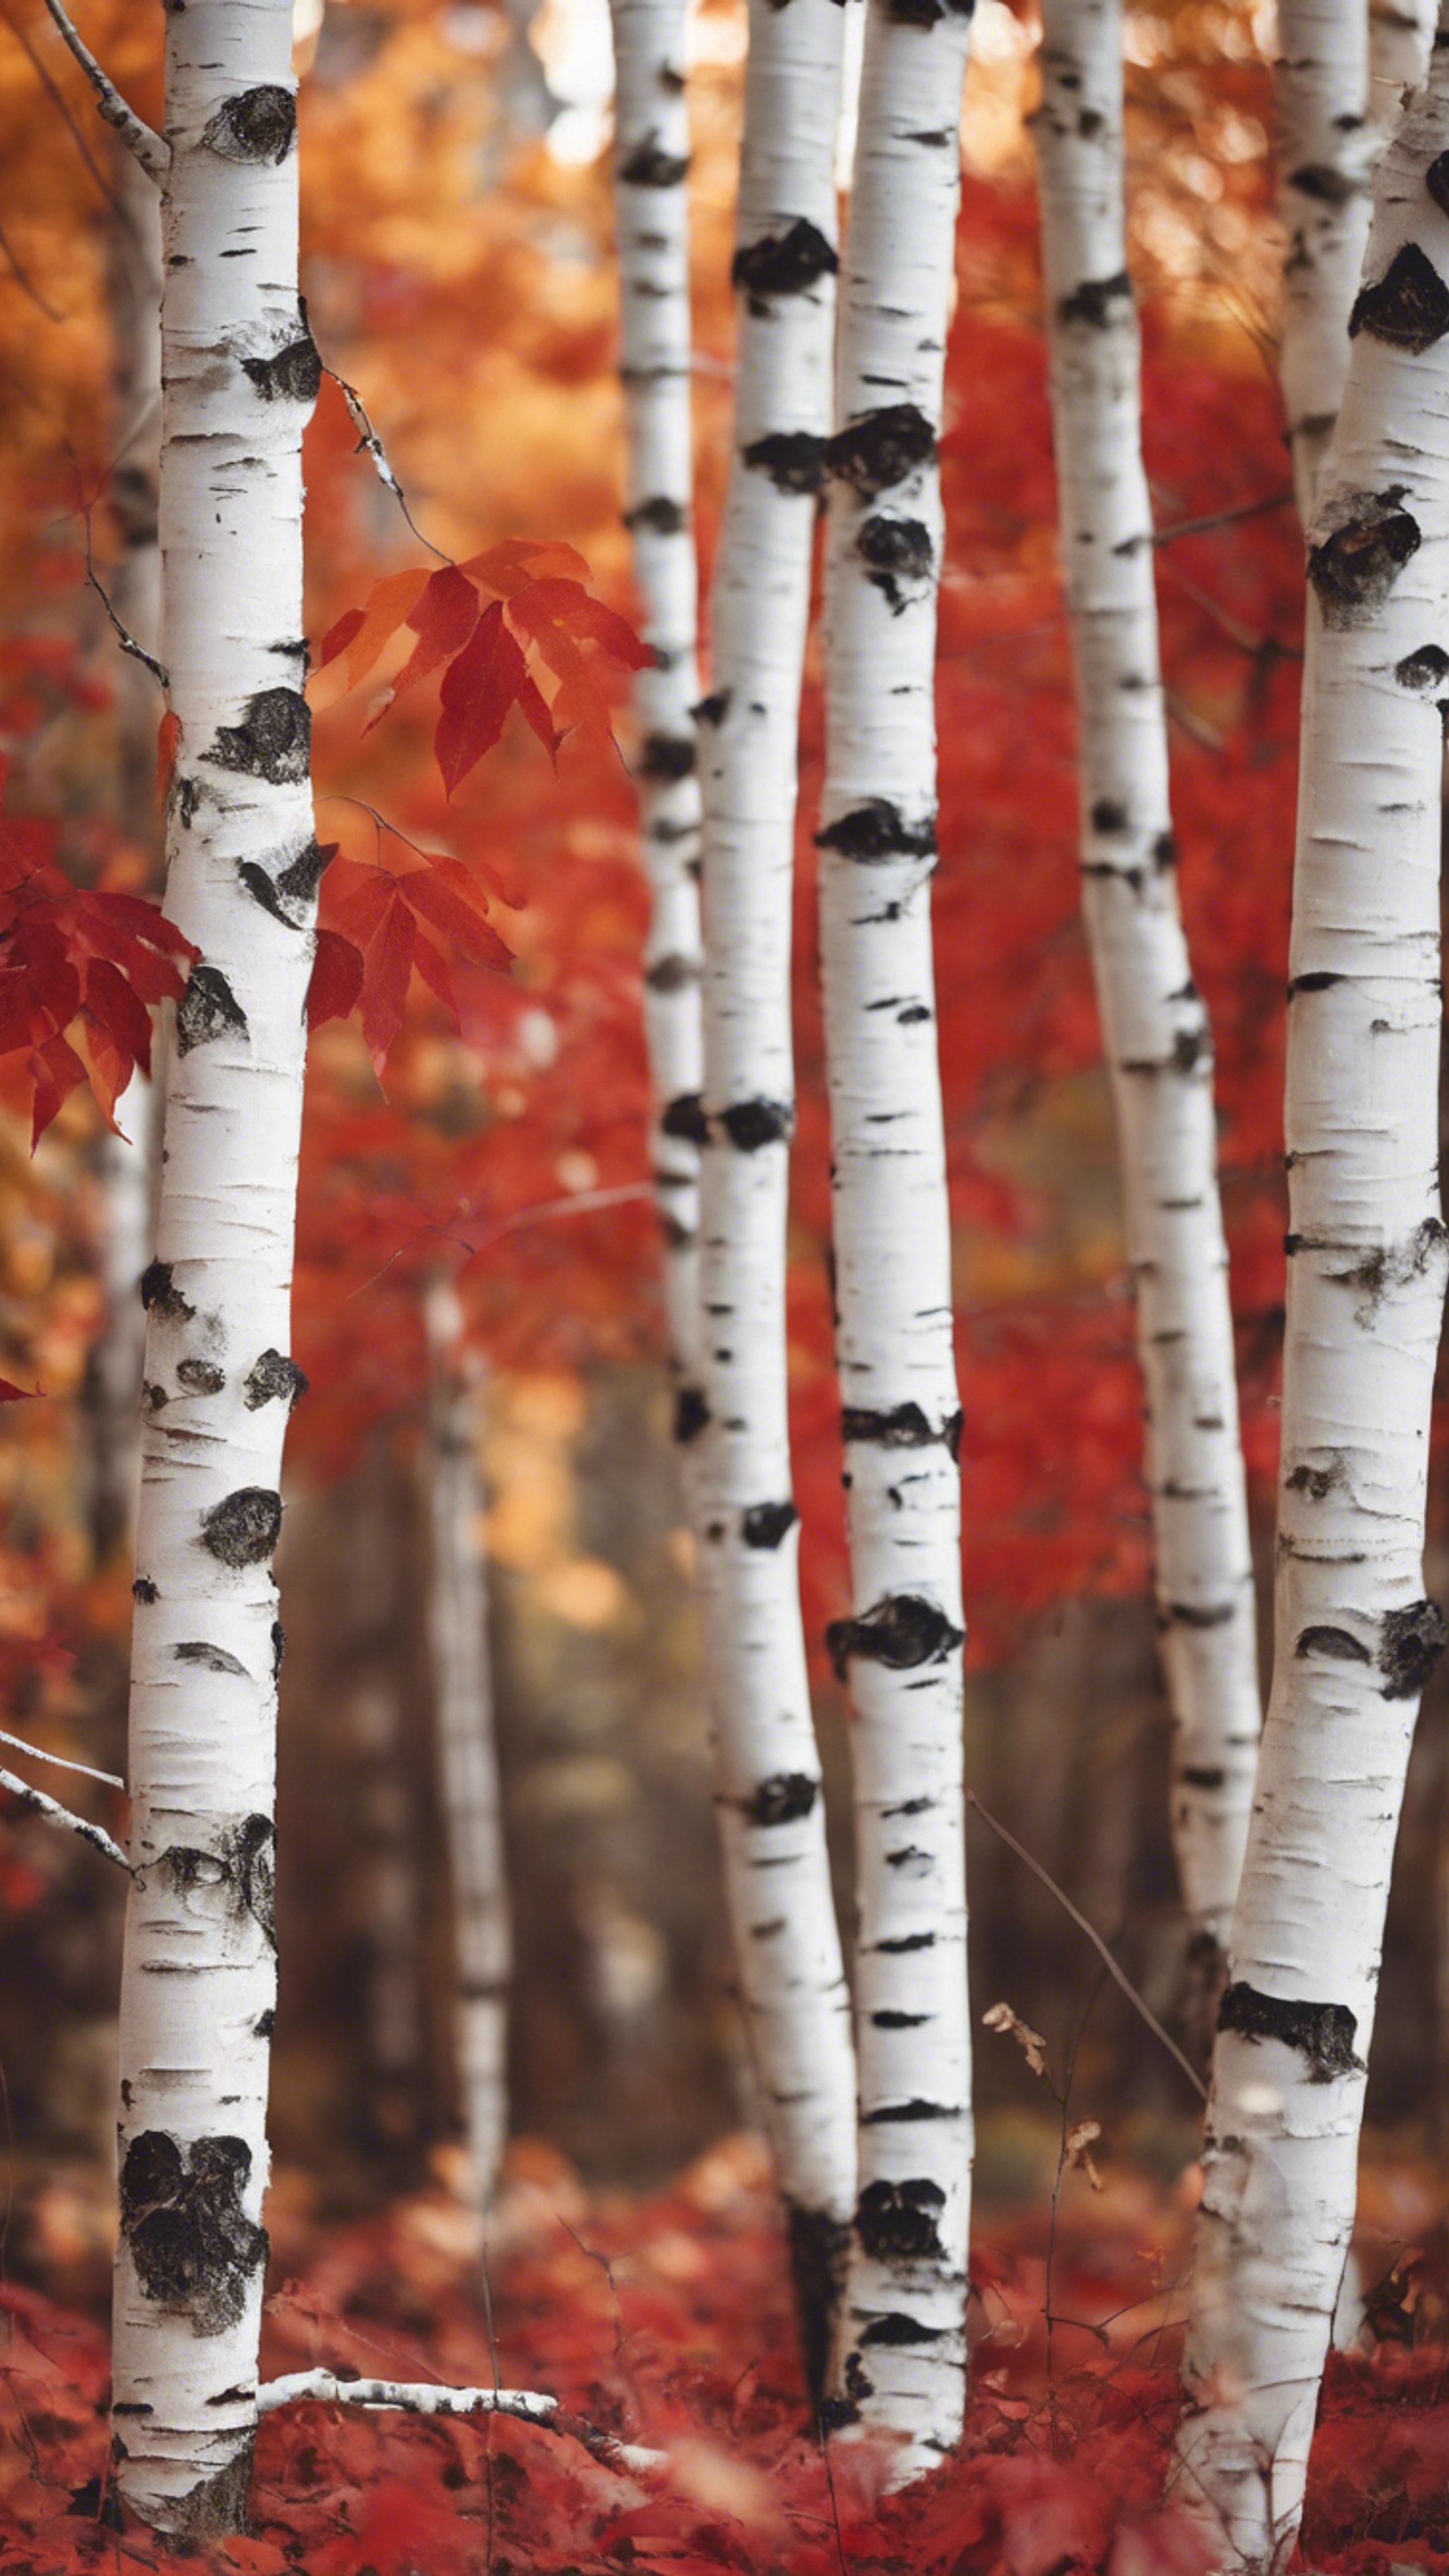 Fall scenes with white birches decked with autumn red foliage. Wallpaper[2b263cdc55c54552b5f9]